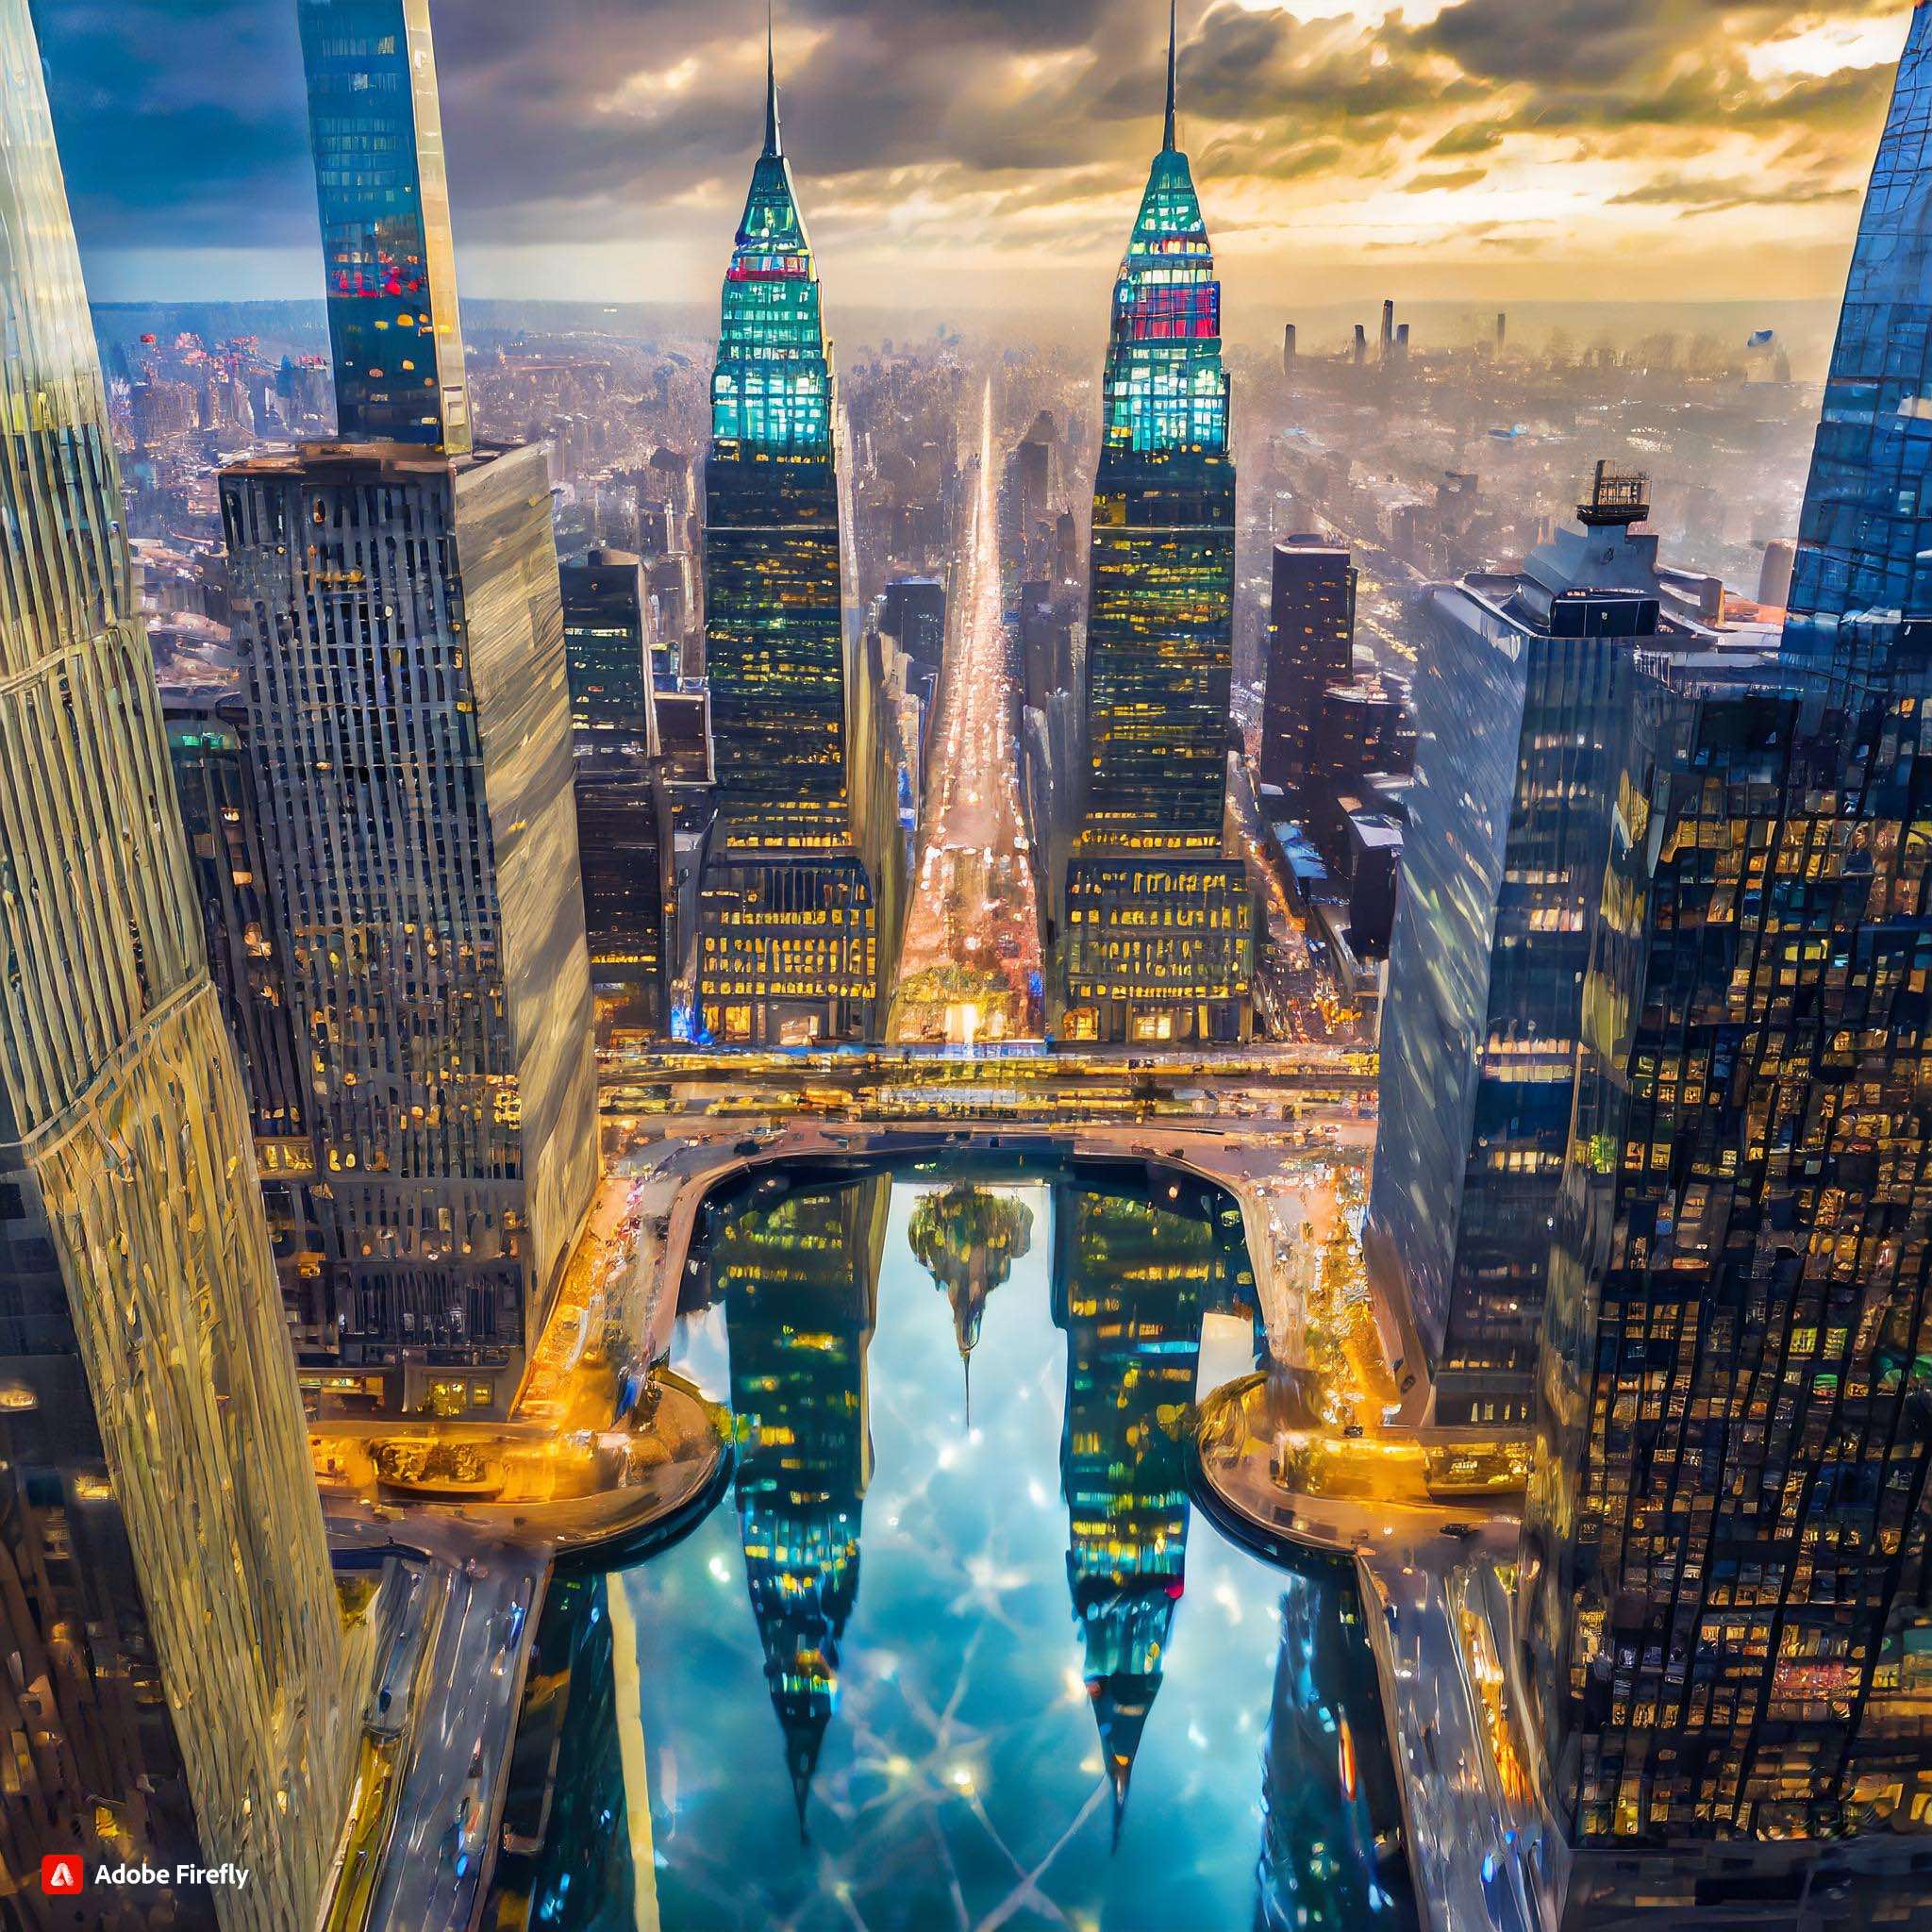 Firefly aerial view of times square with reflection on the water 3505.jpg